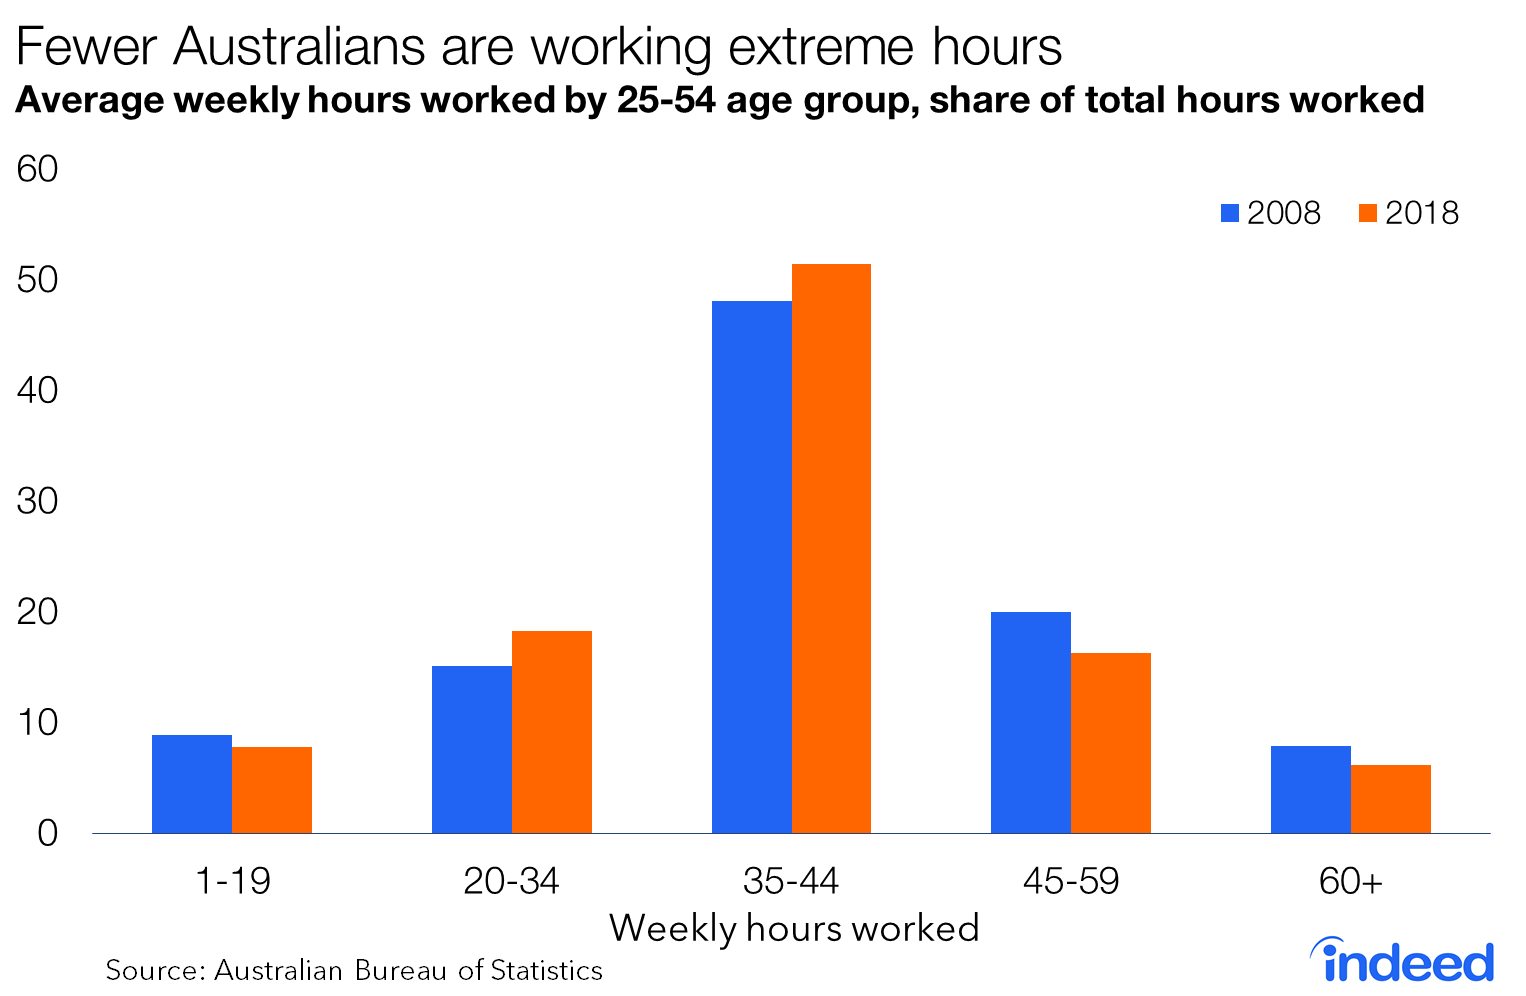 Fewer Australians working extreme hours